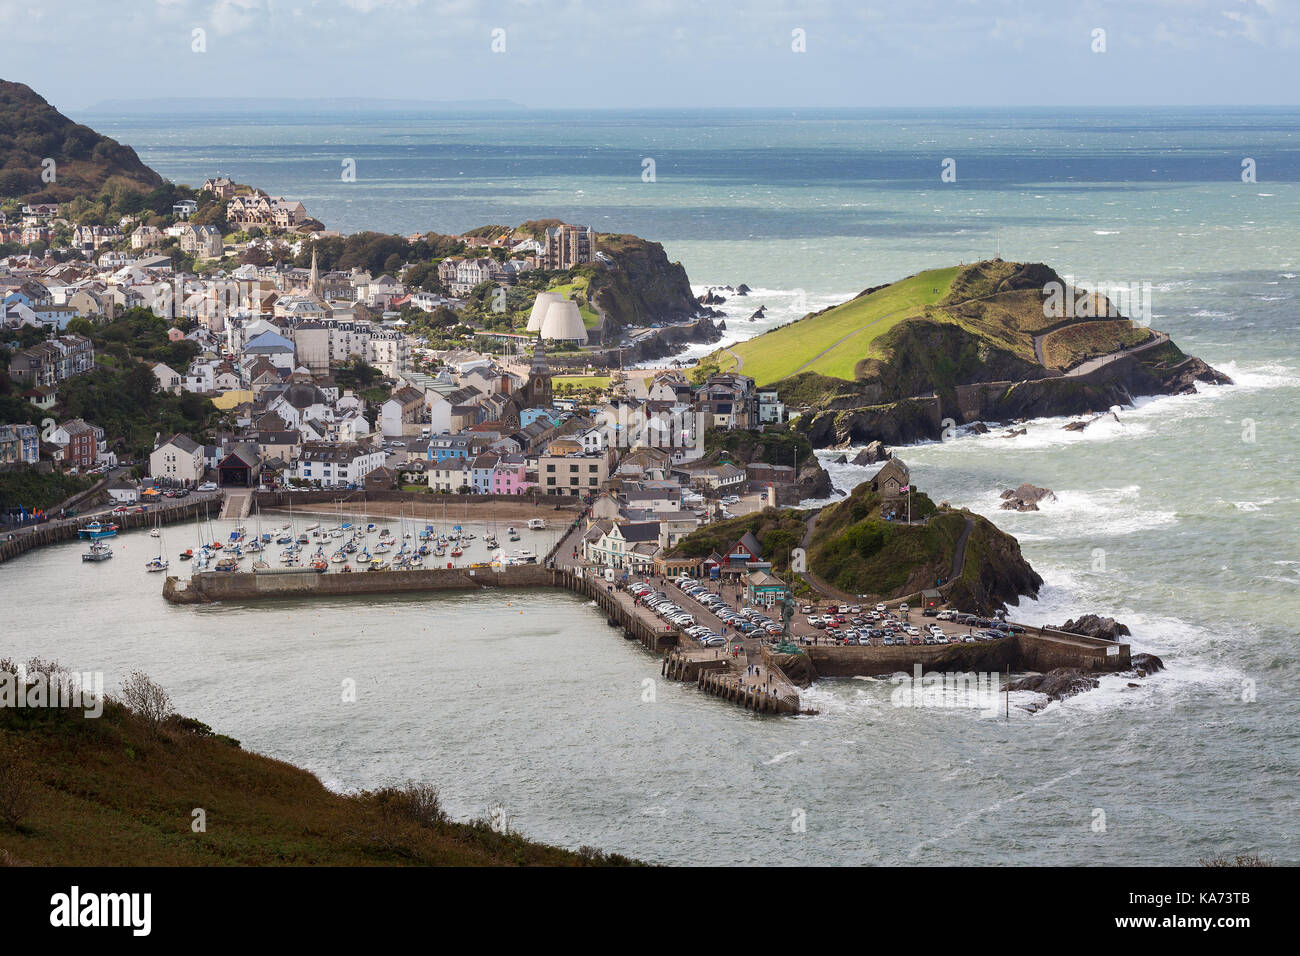 Seaside town of Ilfracombe in North Devon, England. Viewed from high cliffs on the South West coast path. Stock Photo